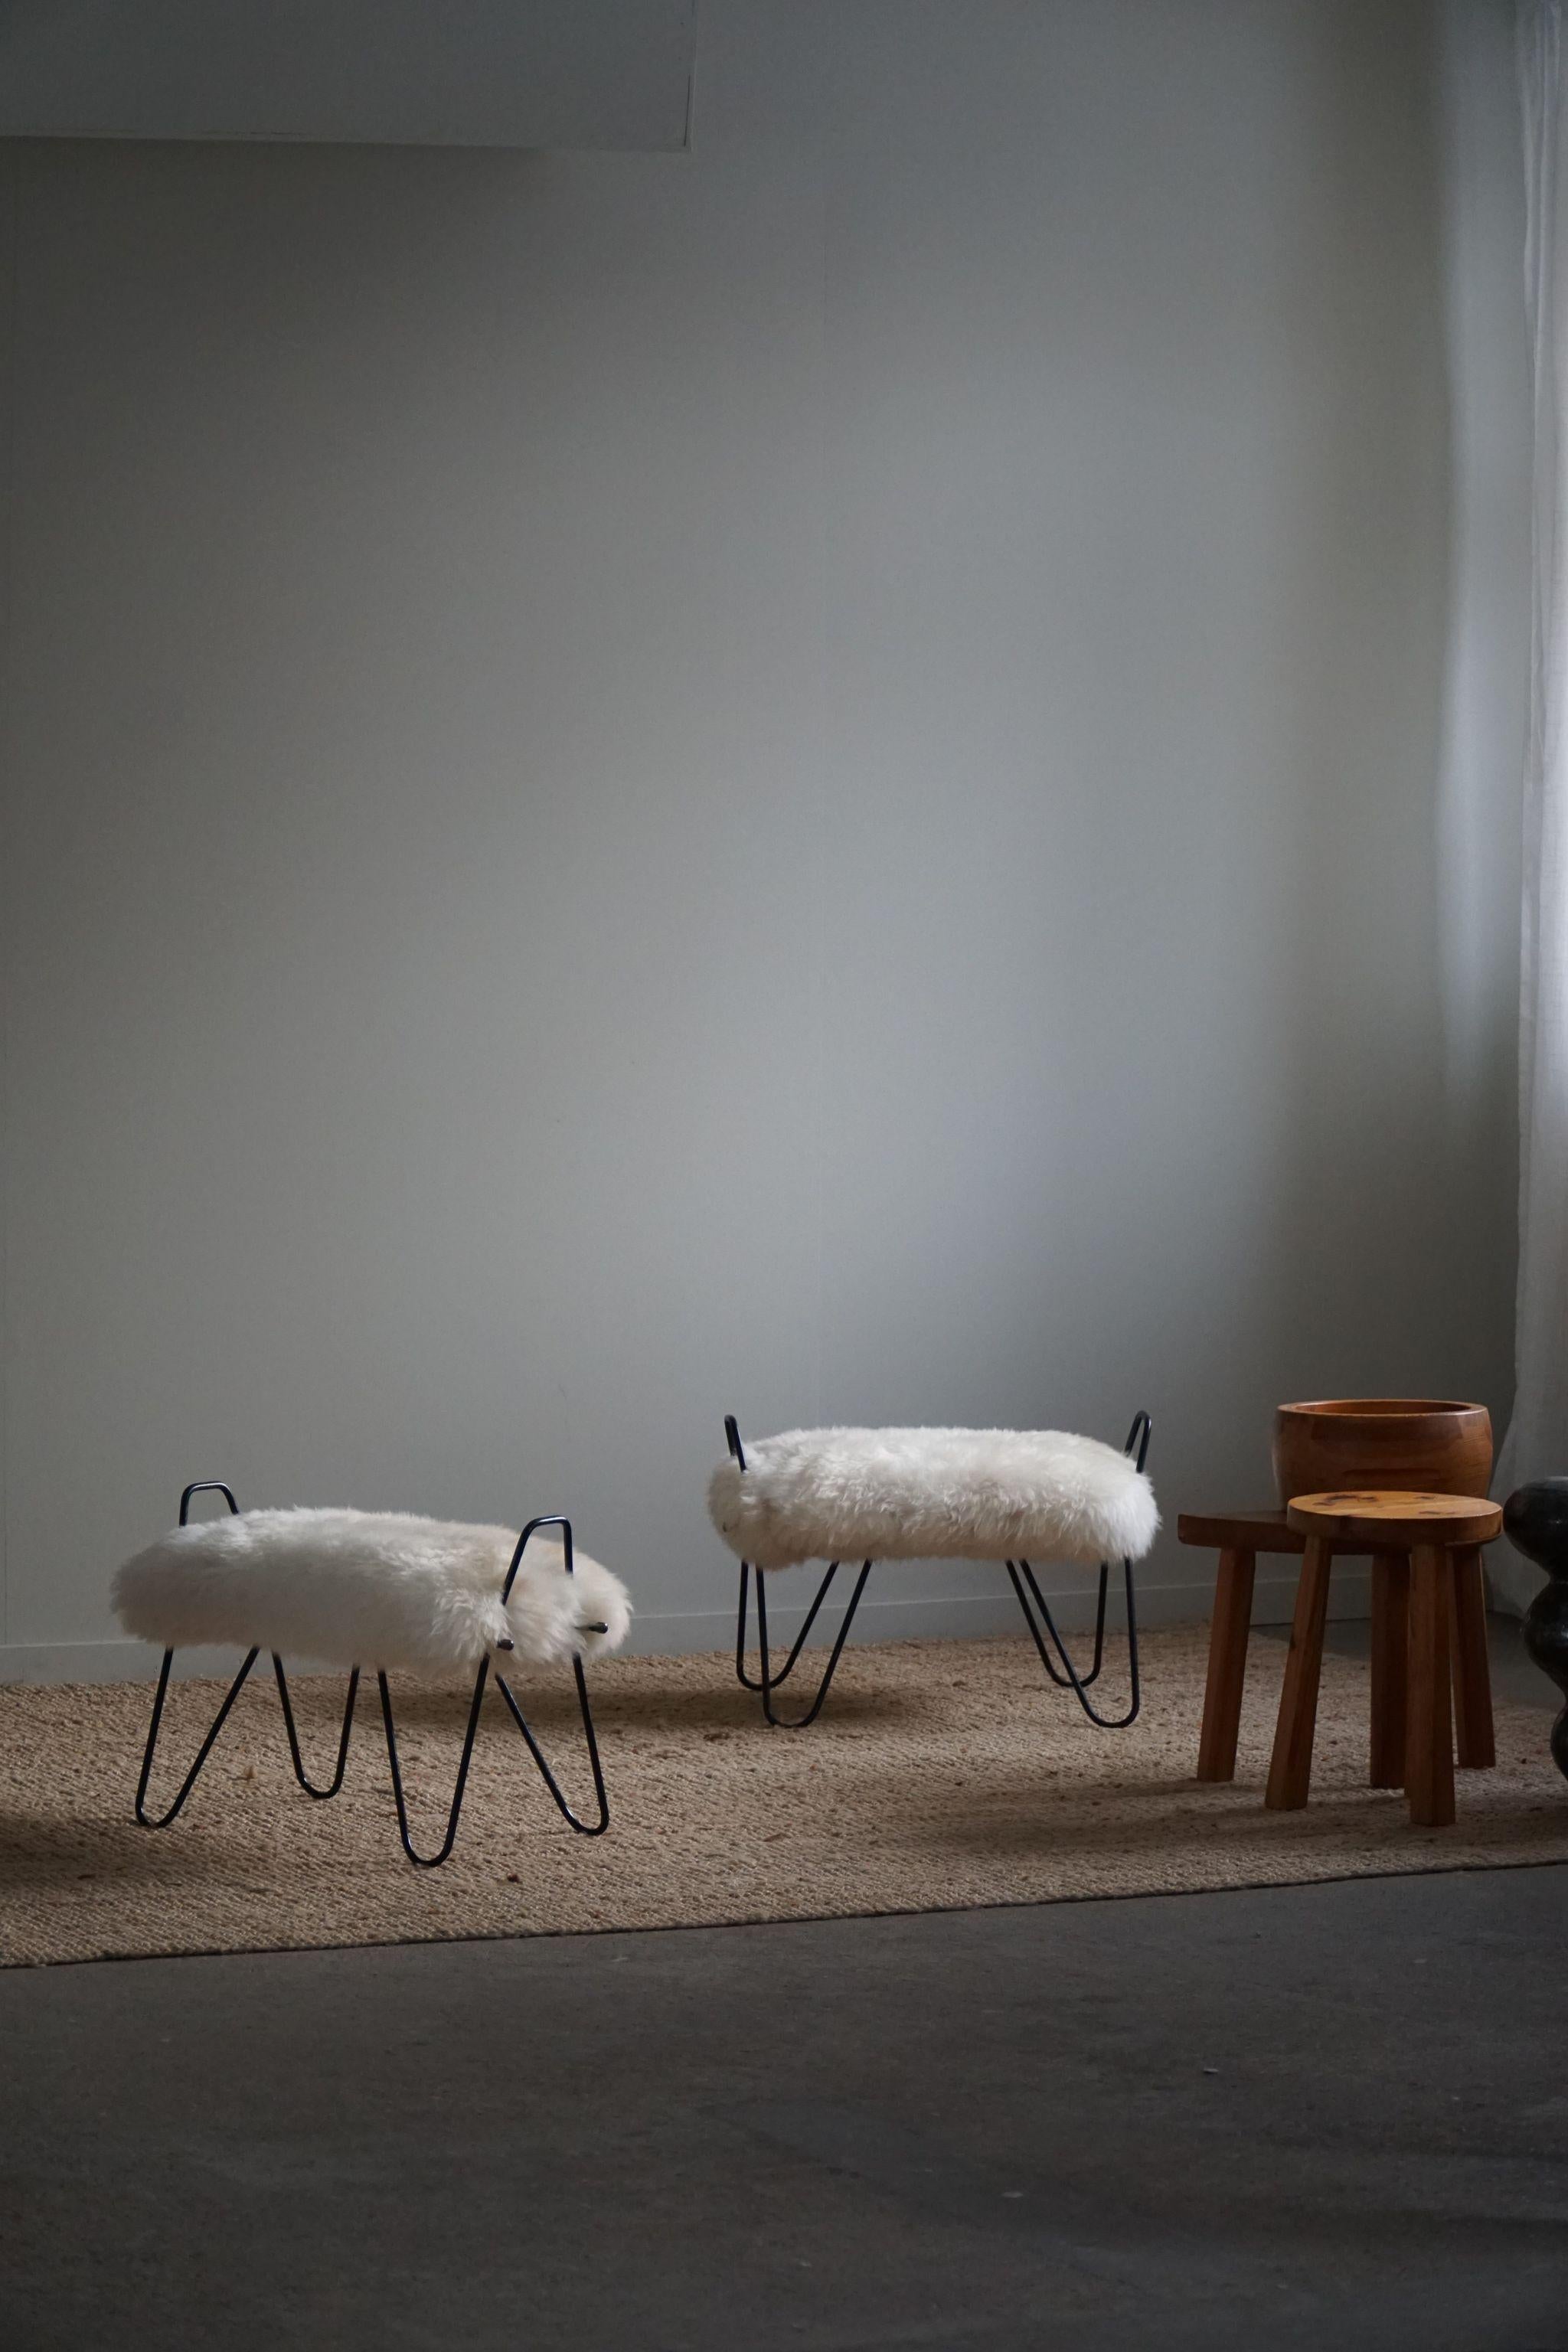 An exquisite and rare pair of stools, made in Denmark in the 1960s. The stools have been reupholstered in a luxurious Icelandic sheepskin, which adds a soft and tactile texture to the overall aesthetic. The wool is warm and inviting, making these